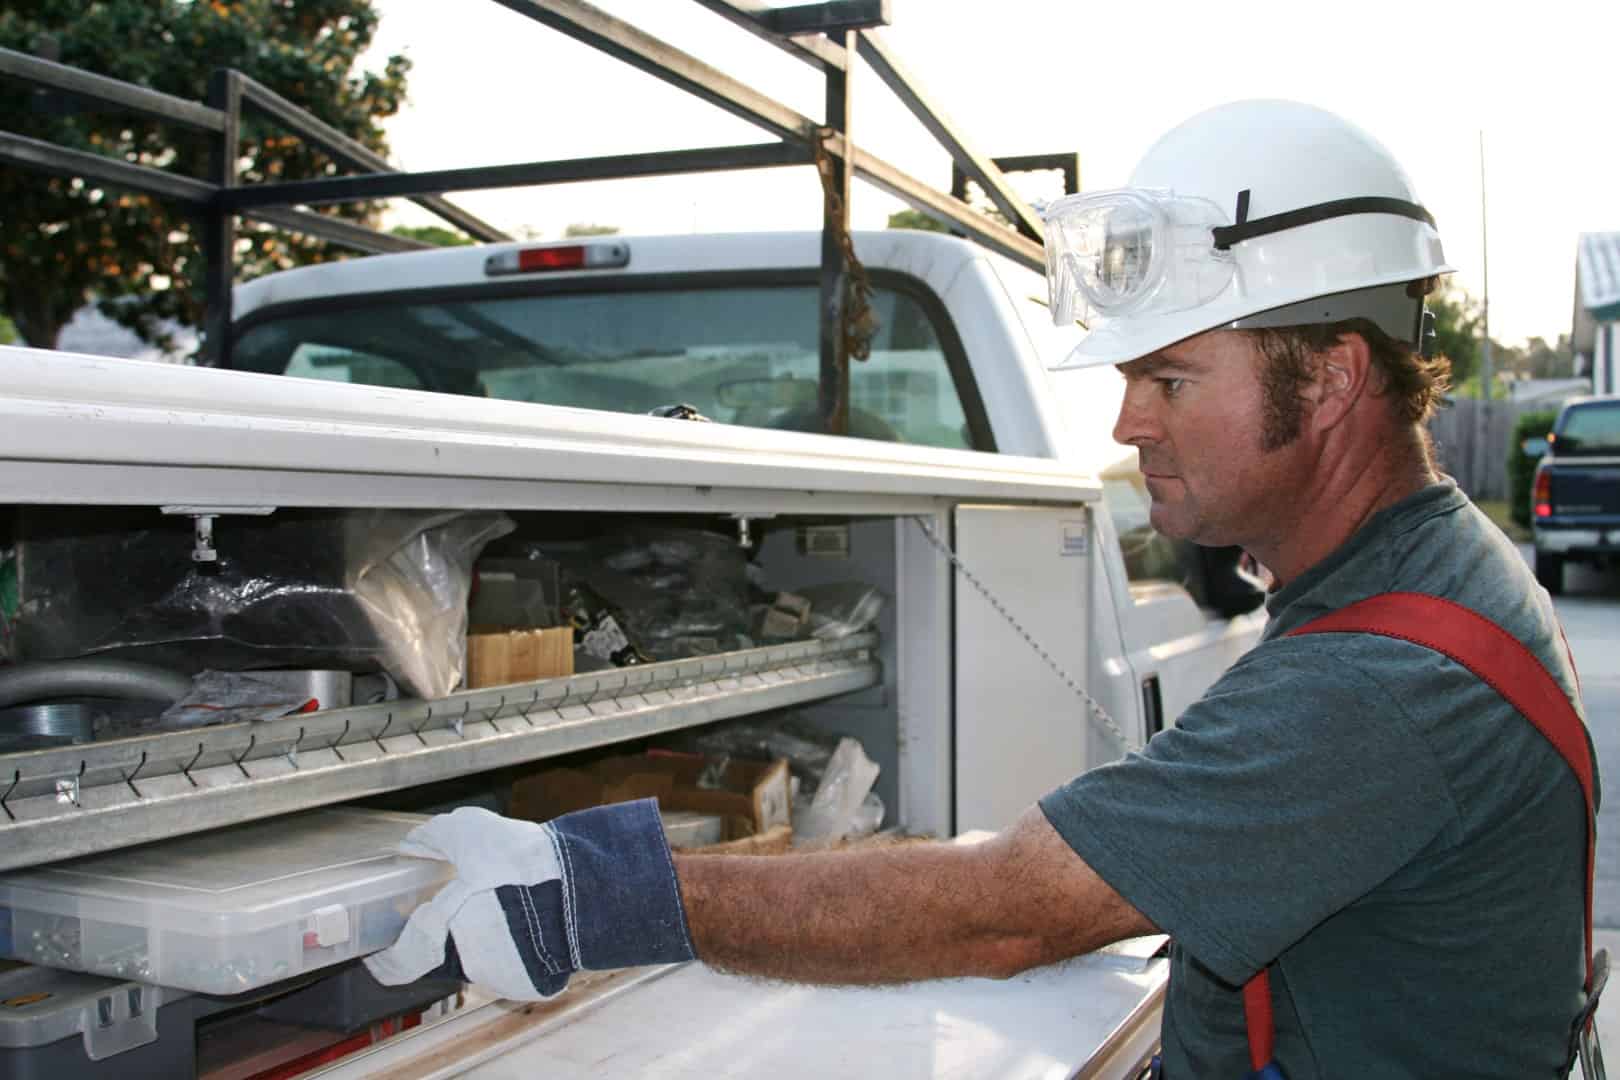 Man removing parts box from toolbox mounted on truck.